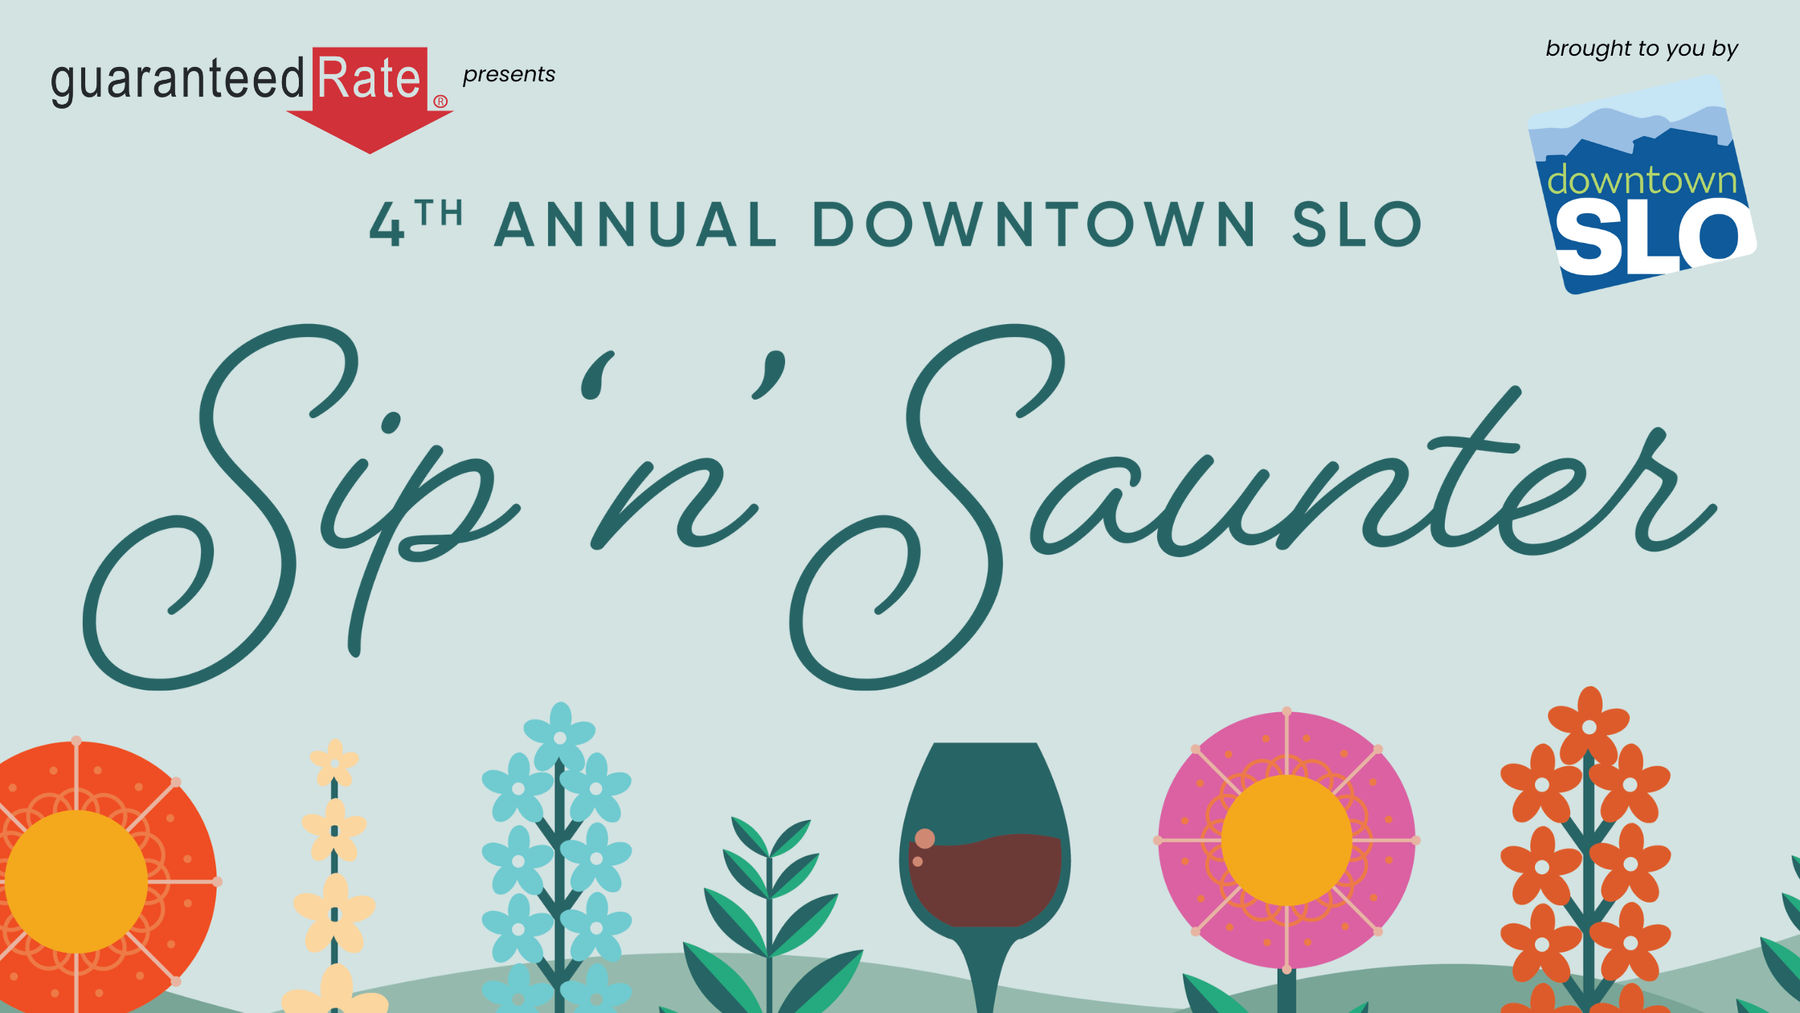 Guaranteed Rate Presents the 4th Annual Downtown SLO Sip 'n' Saunter